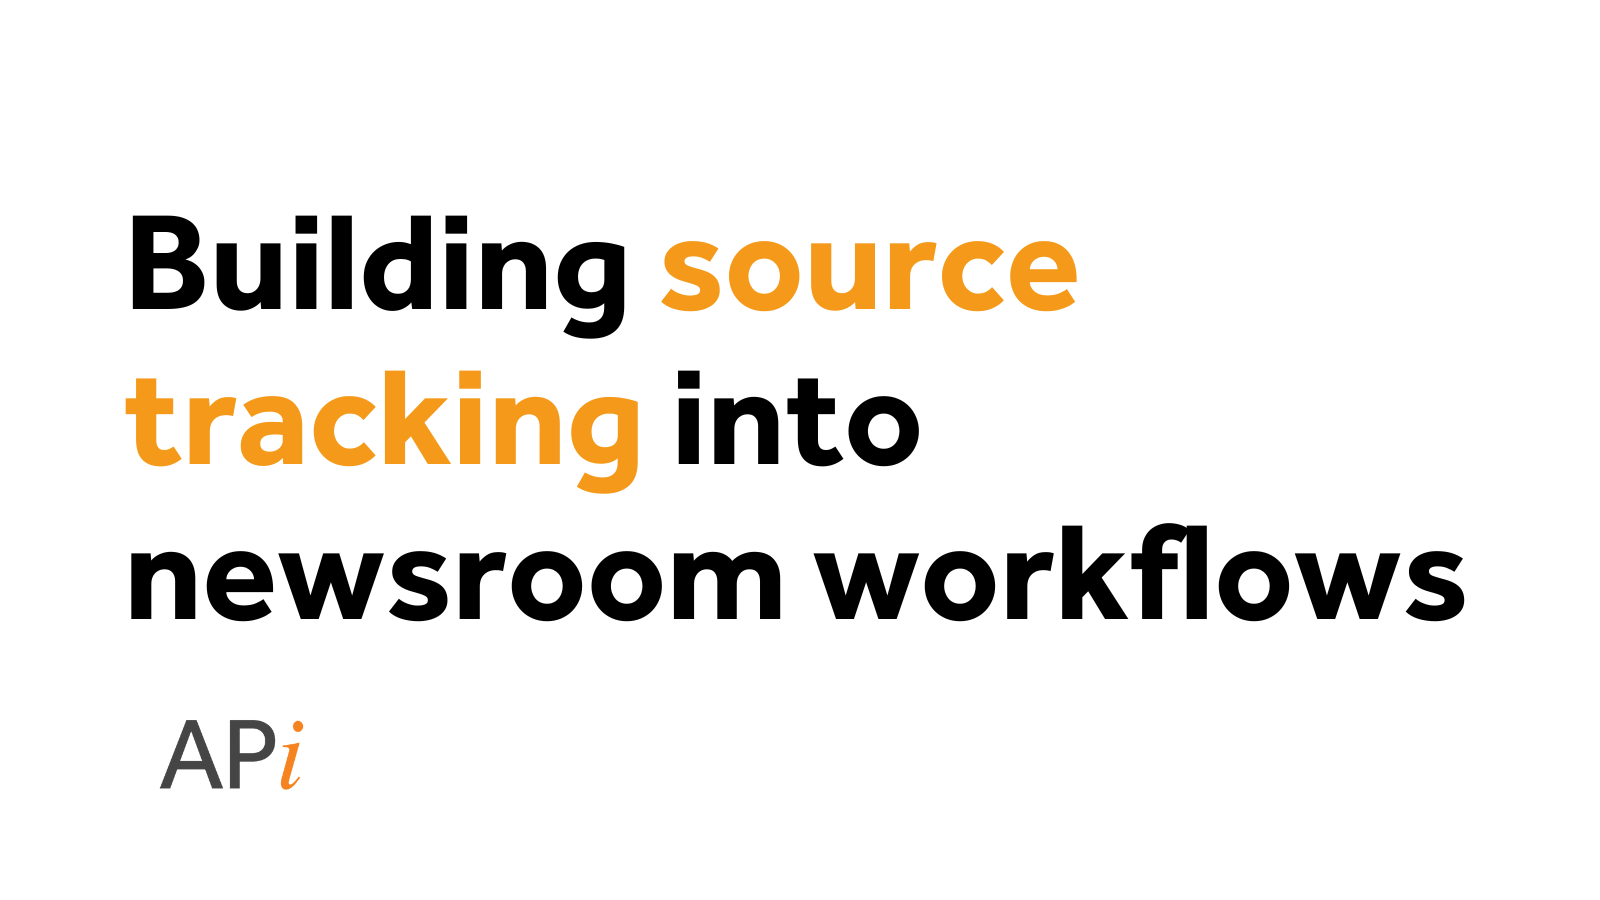 Building source tracking into newsroom workflows - American Press Institute